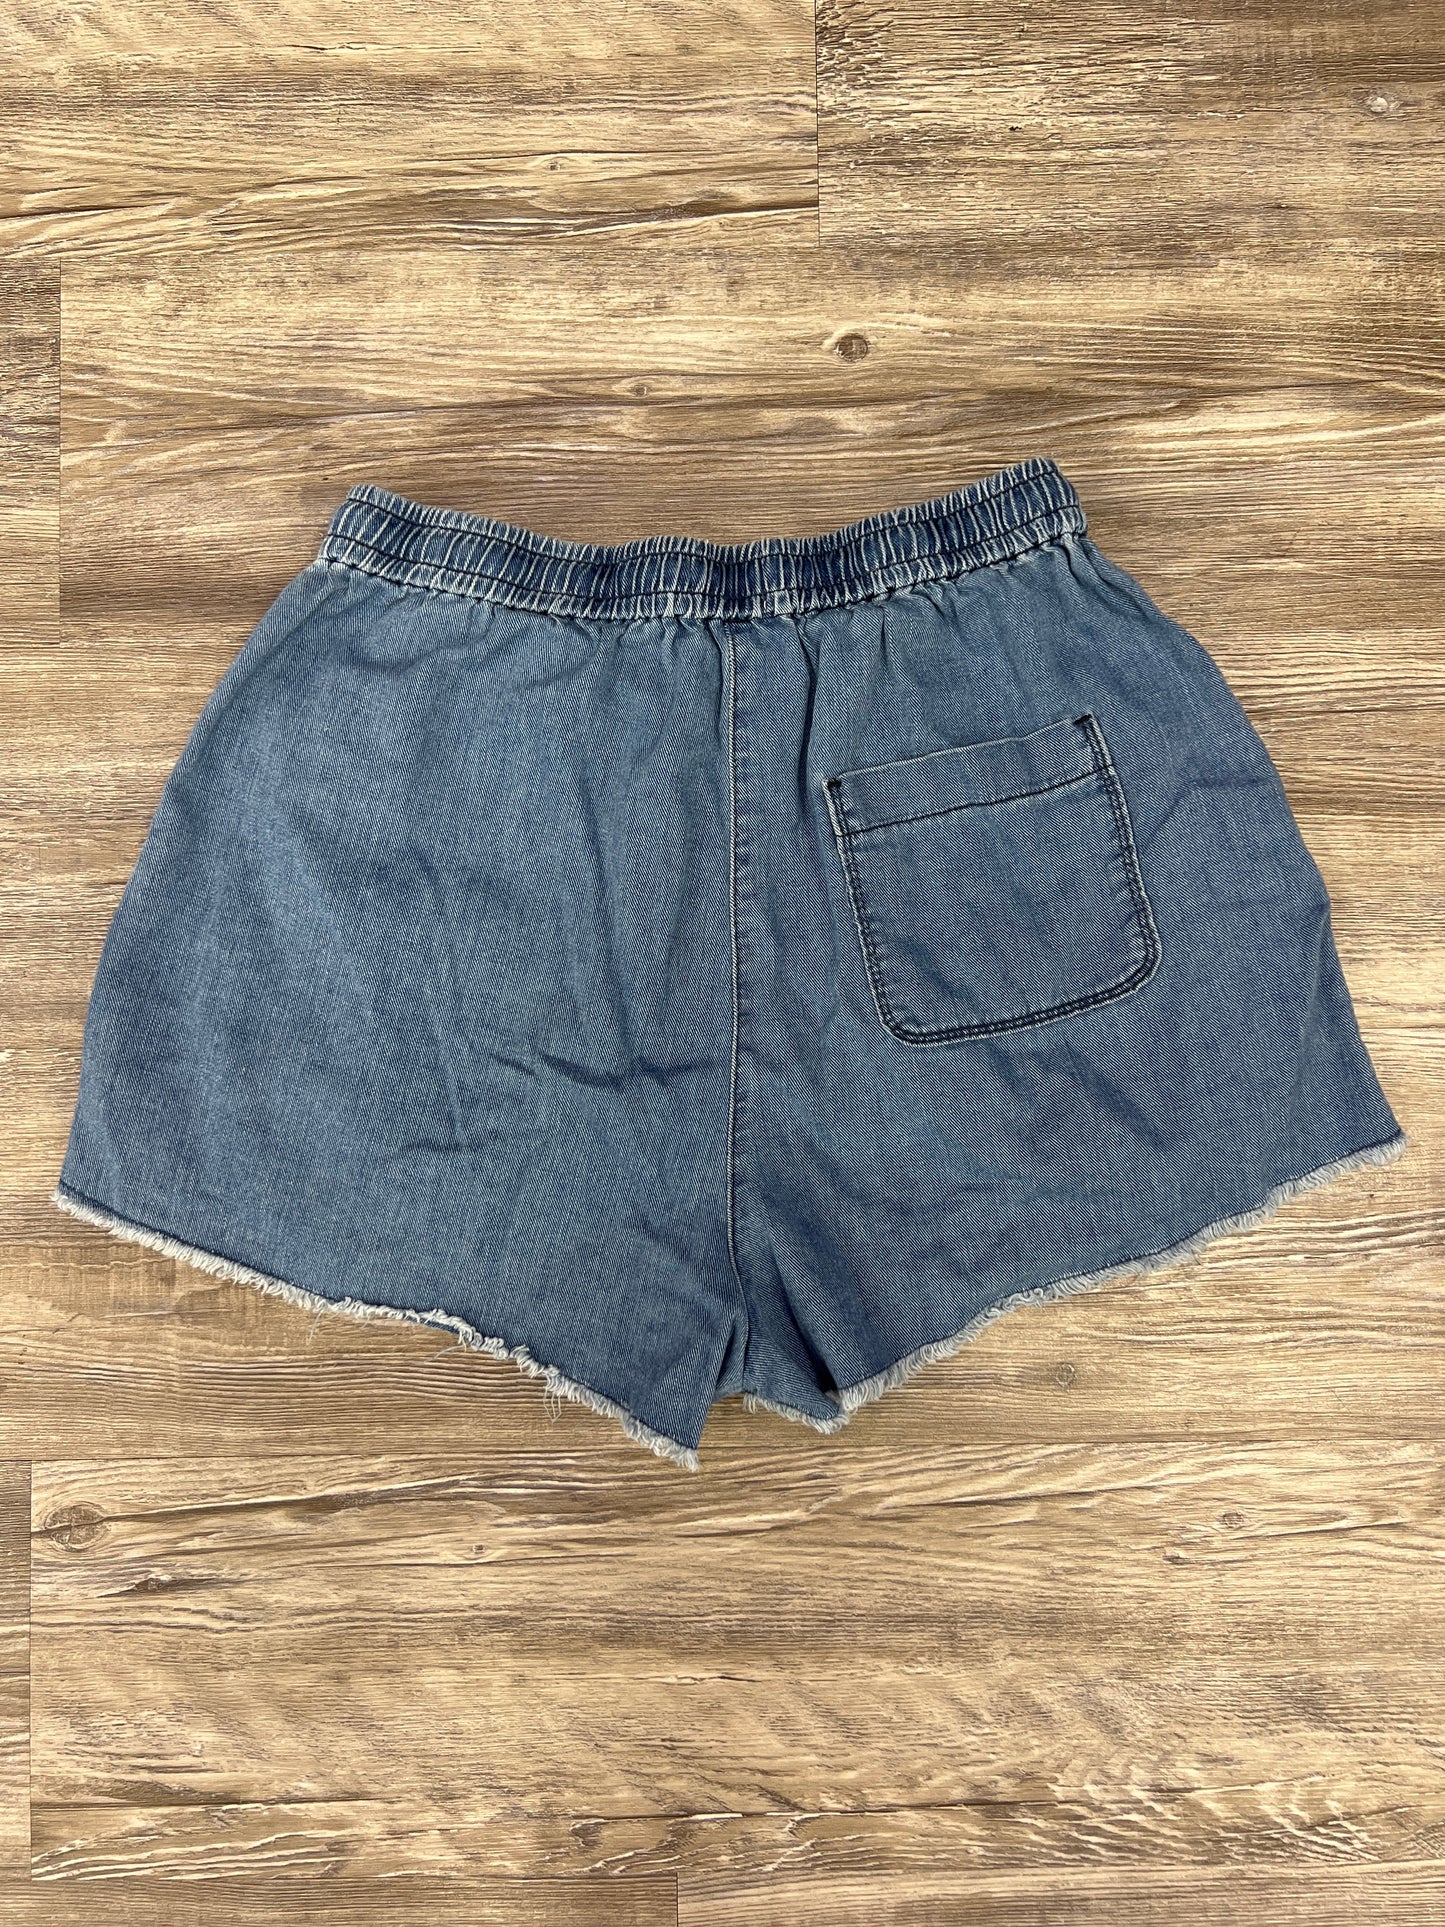 Shorts By Wilfred Size: M